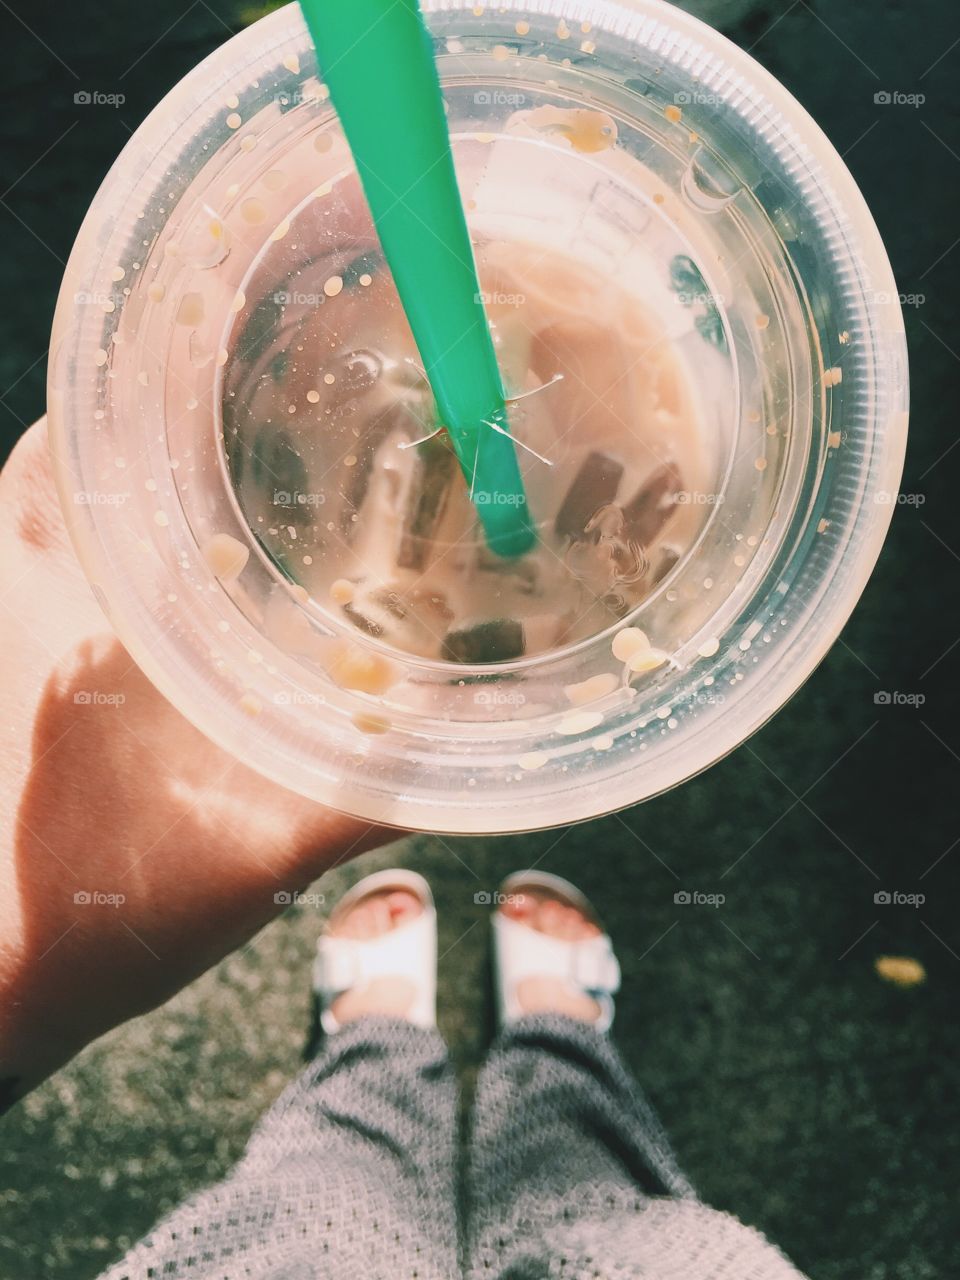 Morning coffee. Nothing better on a humid summer morning than a fresh iced coffee